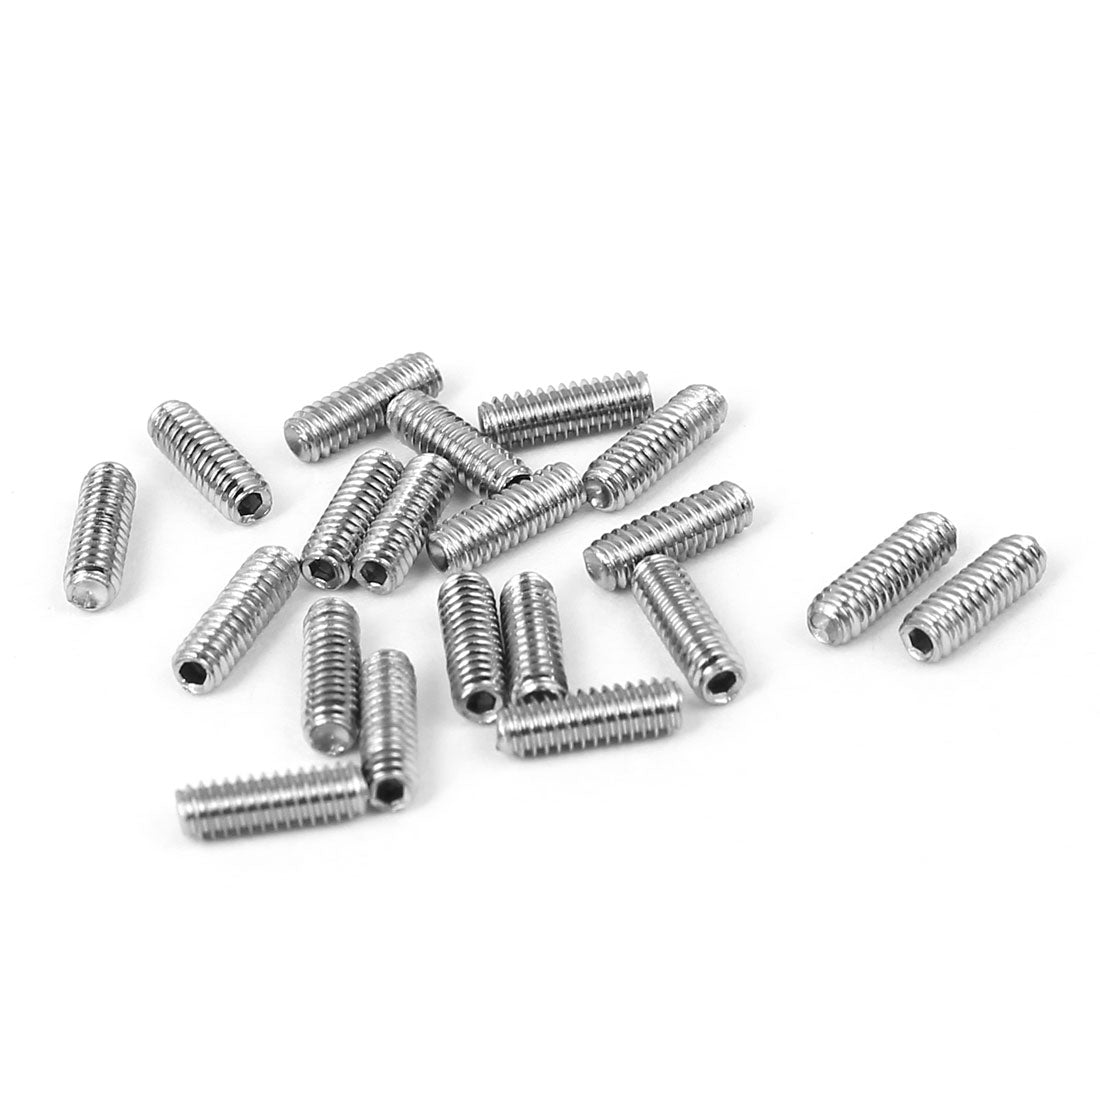 uxcell Uxcell M2x6mm Cup Point Hex Socket Grub Set Screws 20pcs for Gear